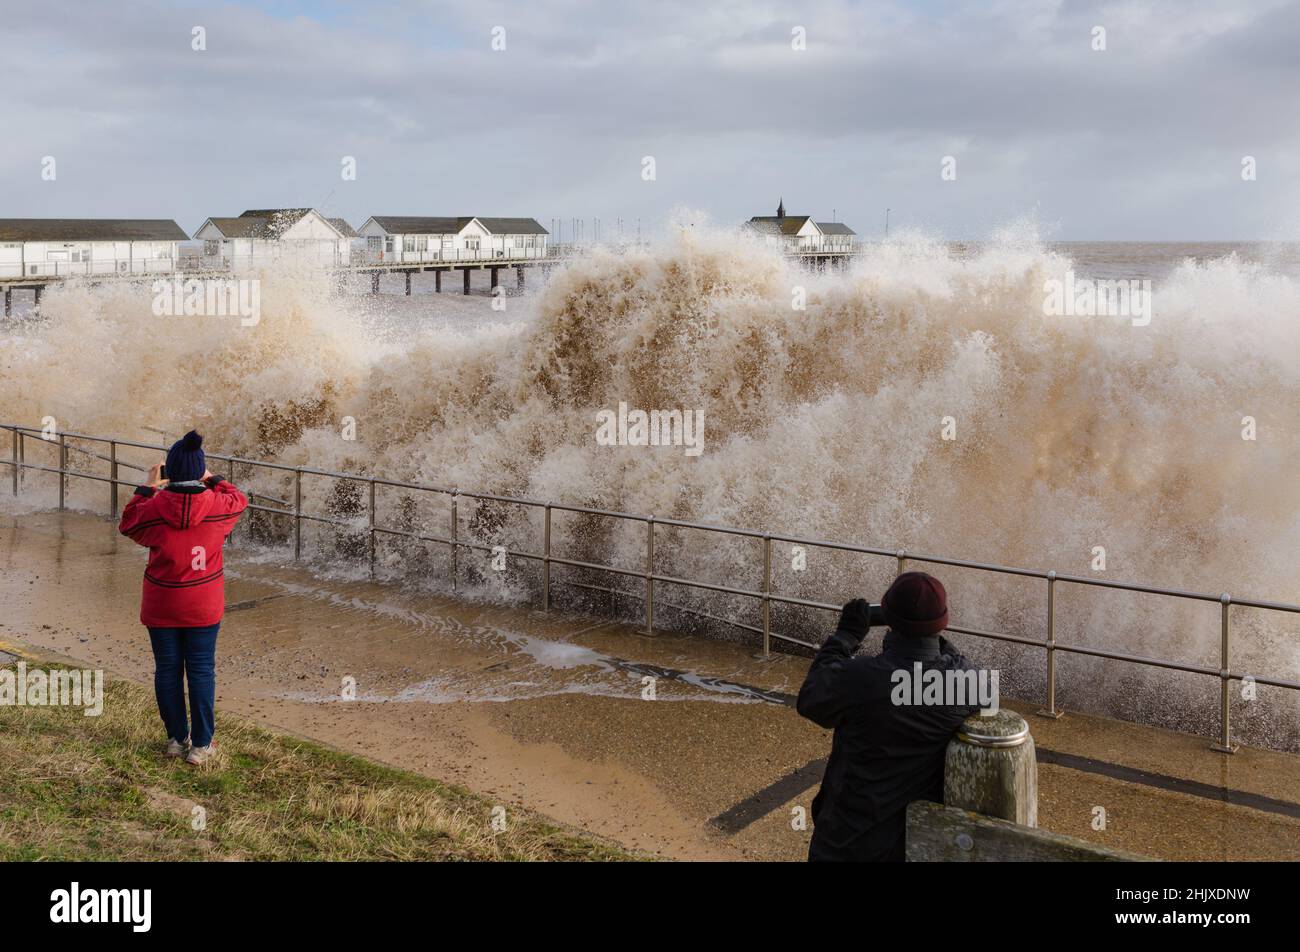 Couple photograph crashing waves at high tide pounding the beach promenade at Southwold Pier Stock Photo